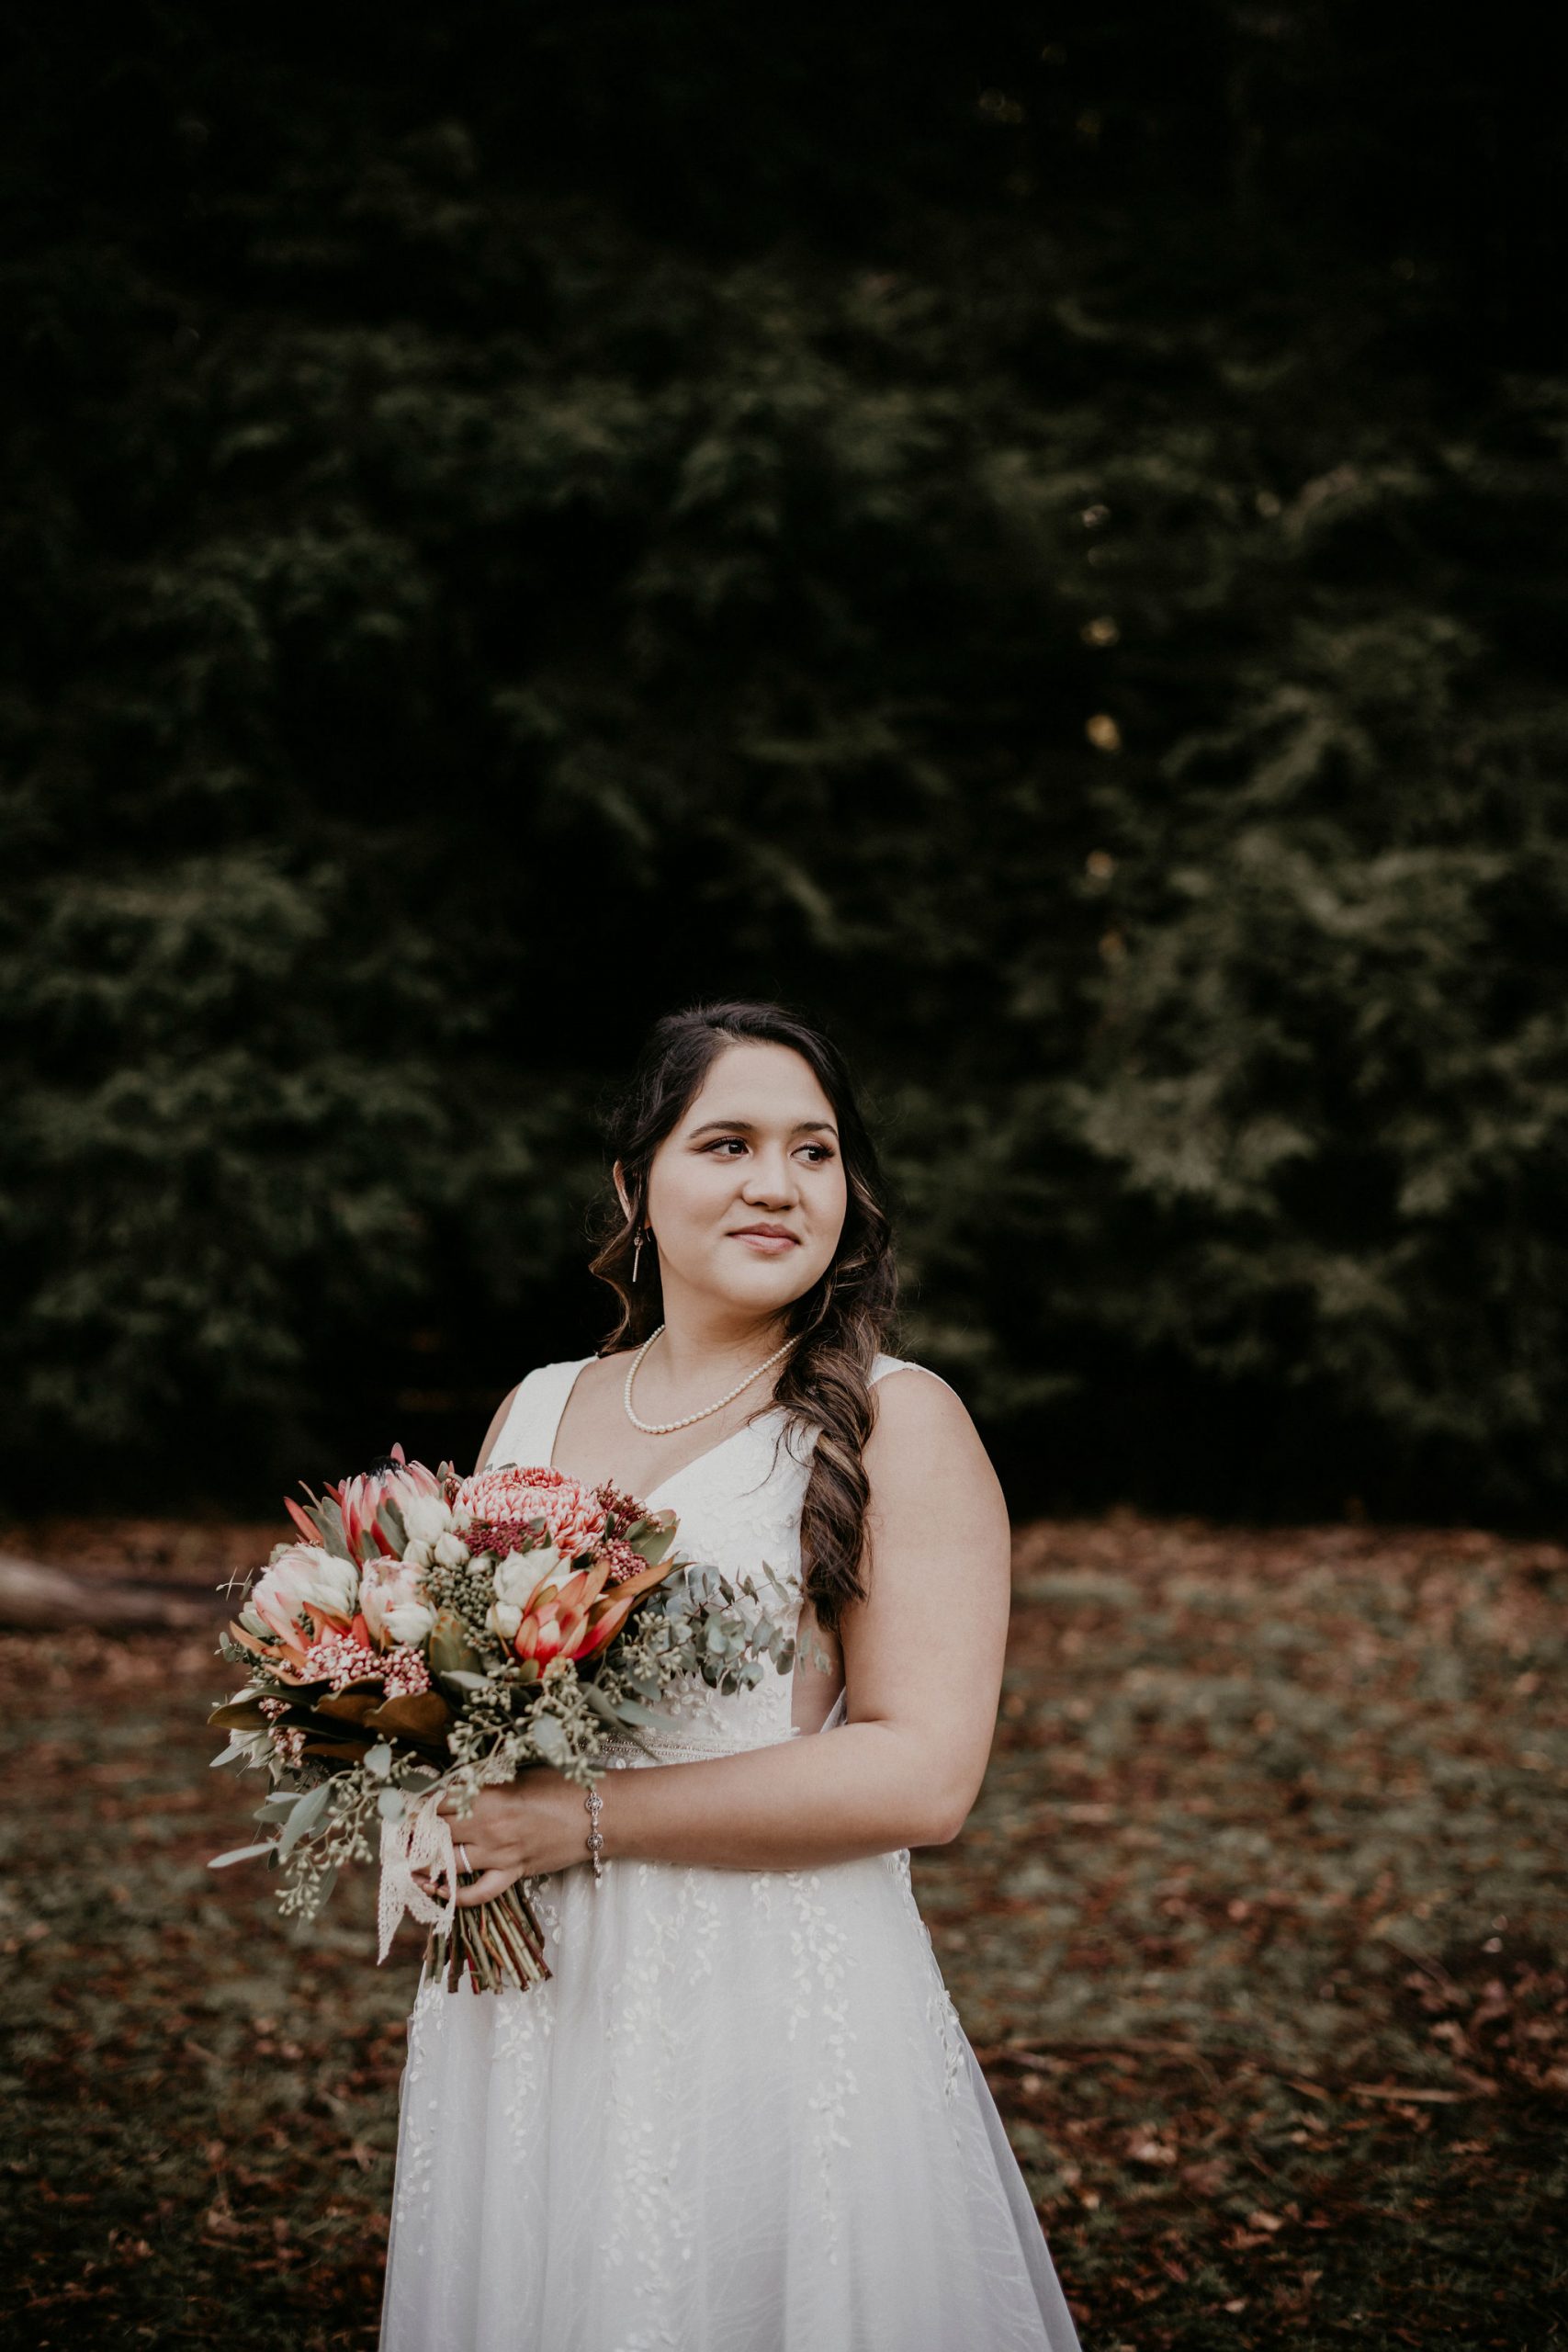 Lets-Elope-Melbourne-Celebrant-Photographer-Elopement-Package-Victoria-Sarah-Matler-Photography-Videography-Video-Warburton-Redwood-Forest-weddings-intimate-12